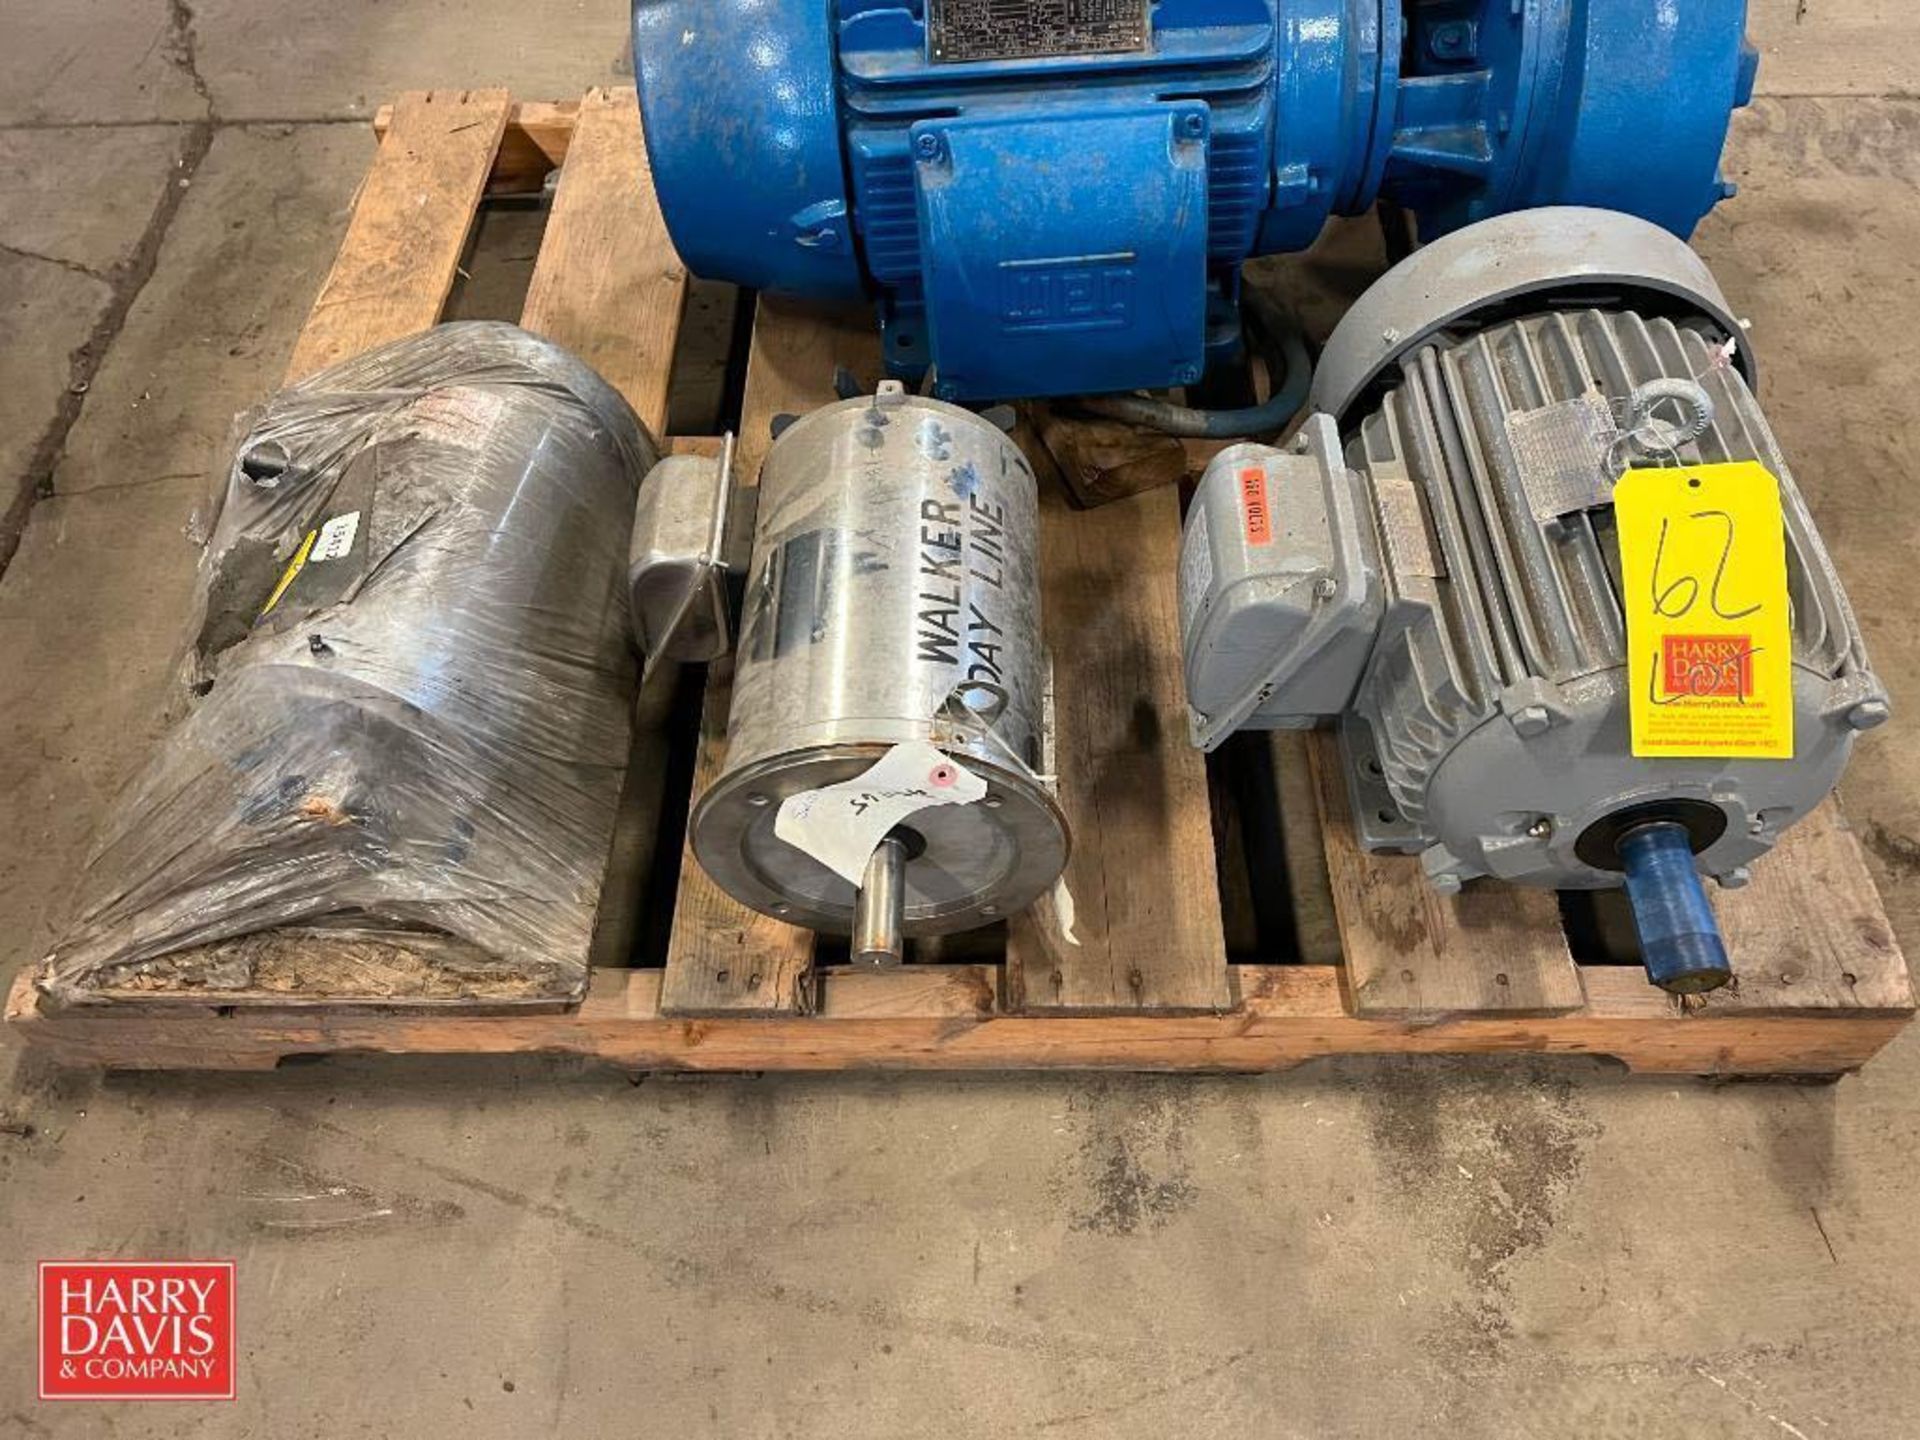 TECO/Westinghouse 10 HP 1,755 RPM, Sterling Electric S/S Clad 5 HP 1,760 RPM Motor and Baldor 1.5 HP